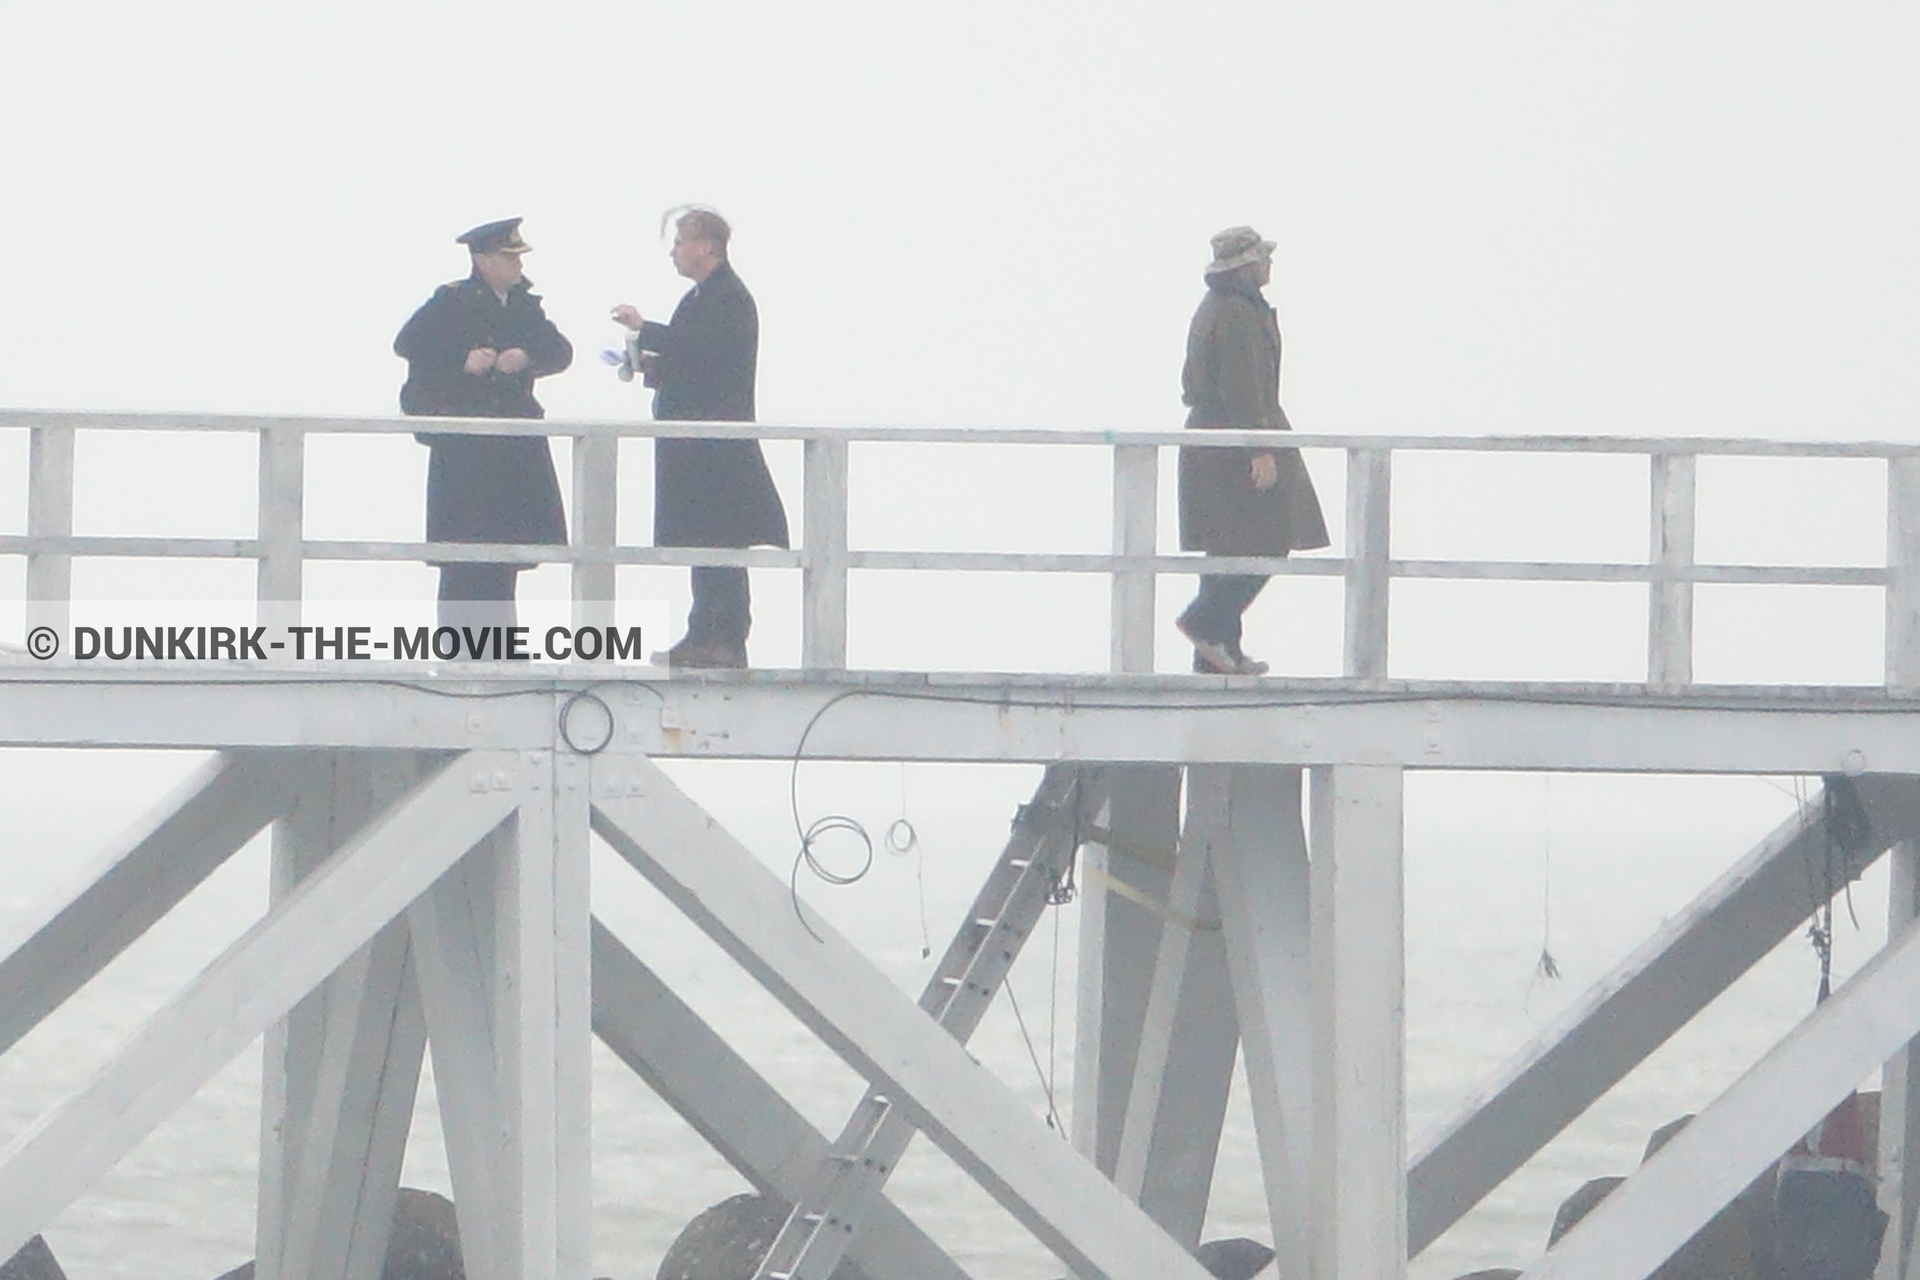 Picture with EST pier, Kenneth Branagh, Christopher Nolan, technical team,  from behind the scene of the Dunkirk movie by Nolan